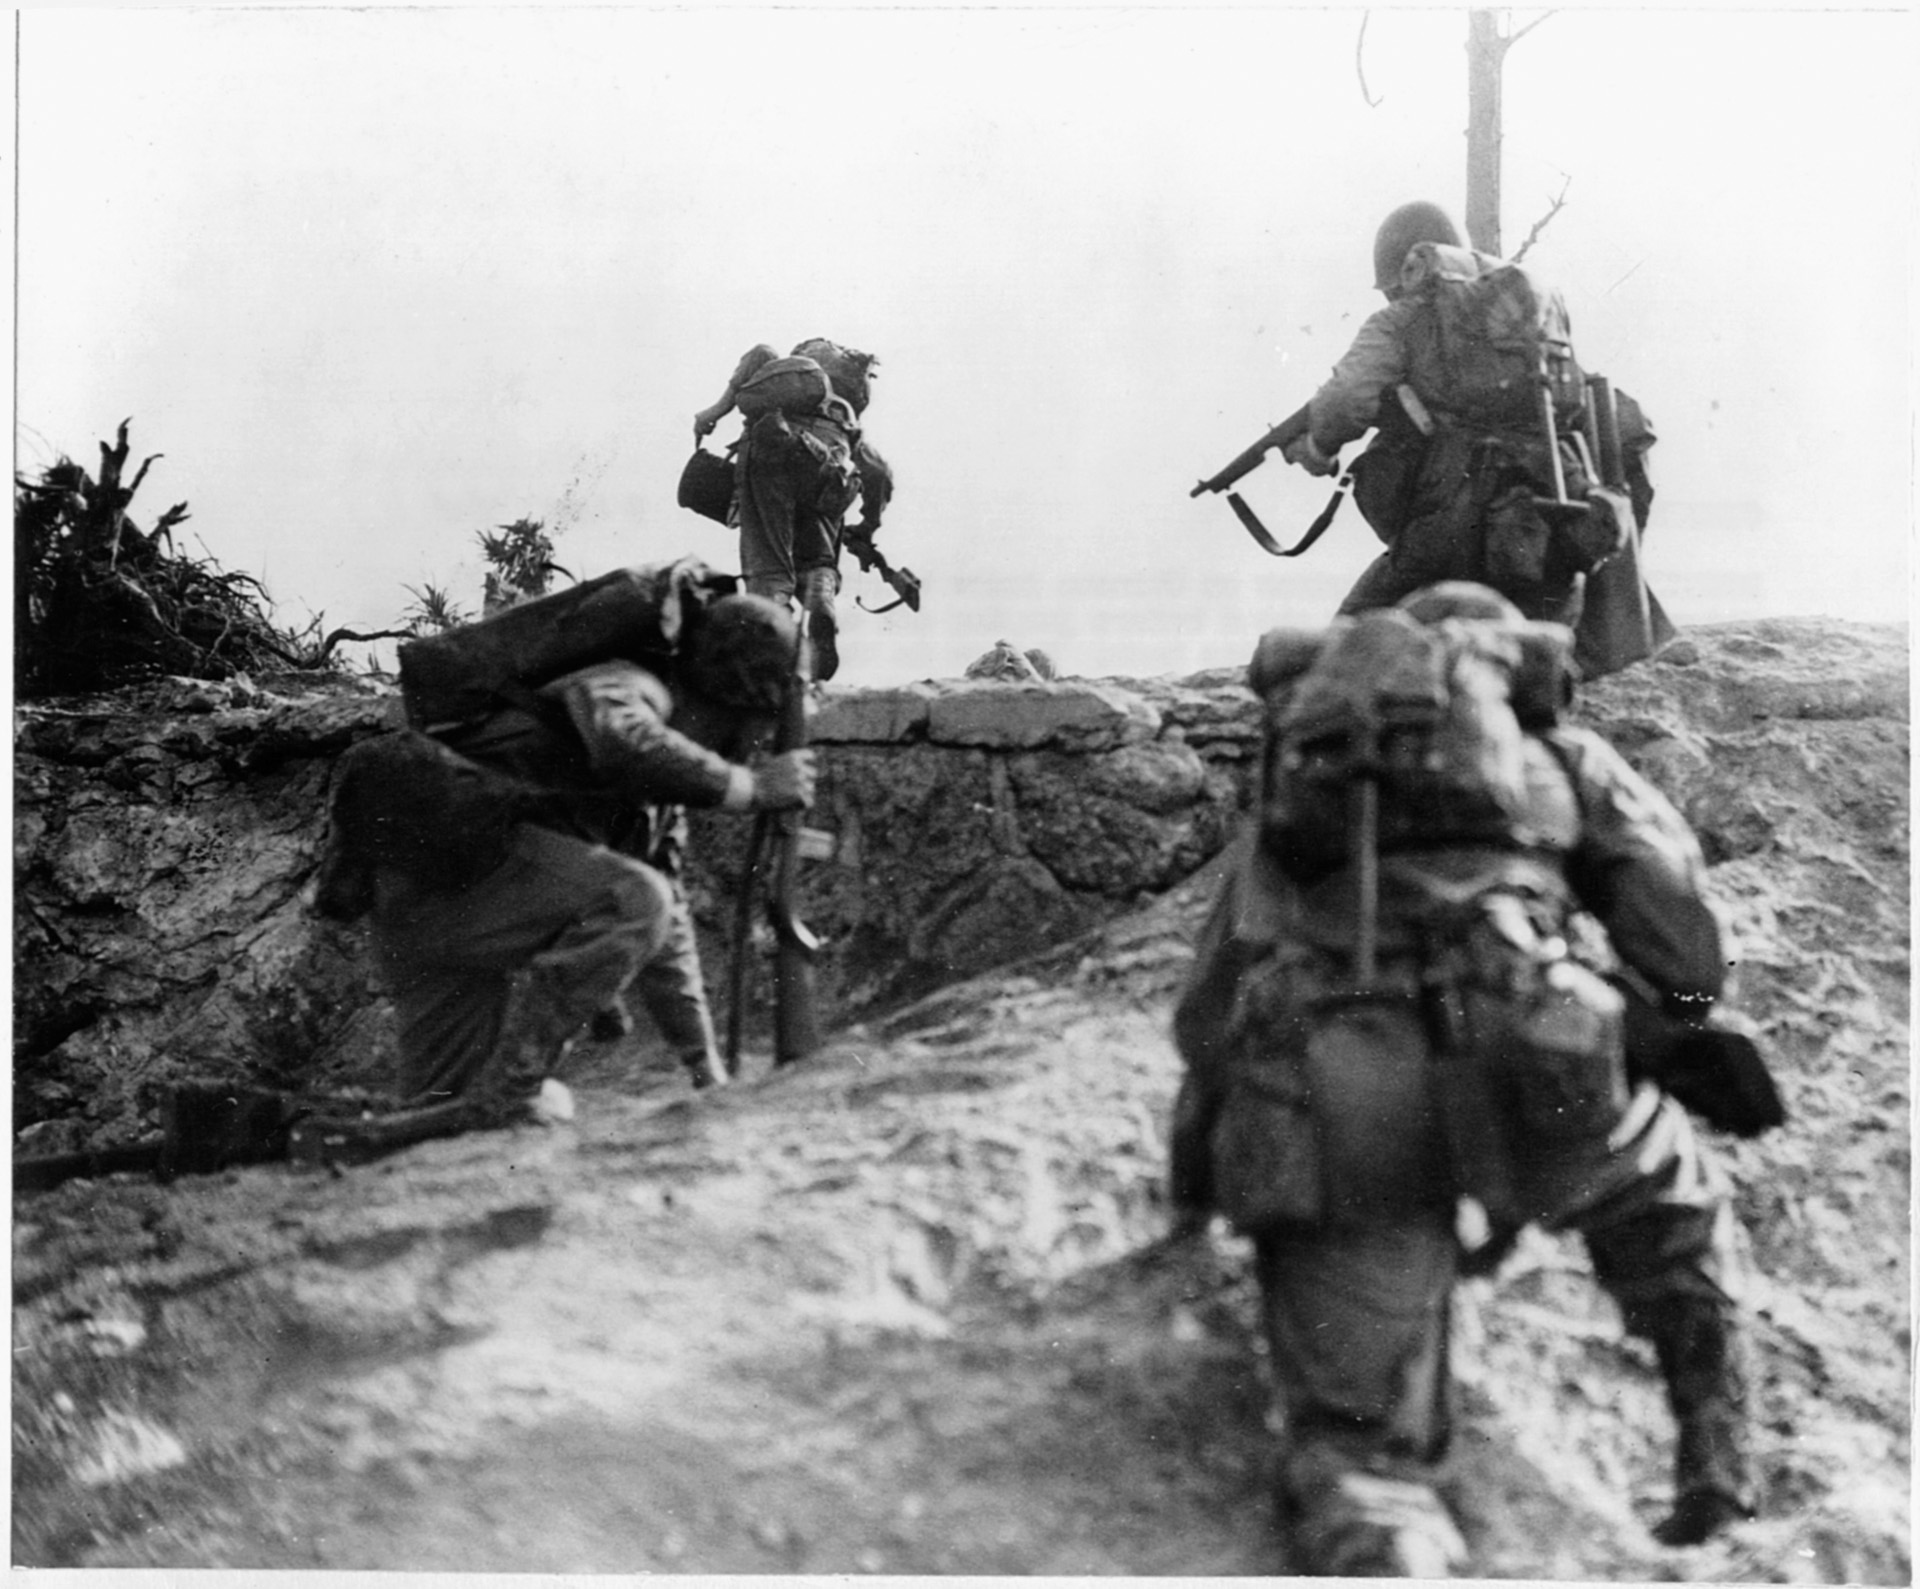 Marines advance on the run. Two carry communications wire and radio equipment to stay in contact with other units.